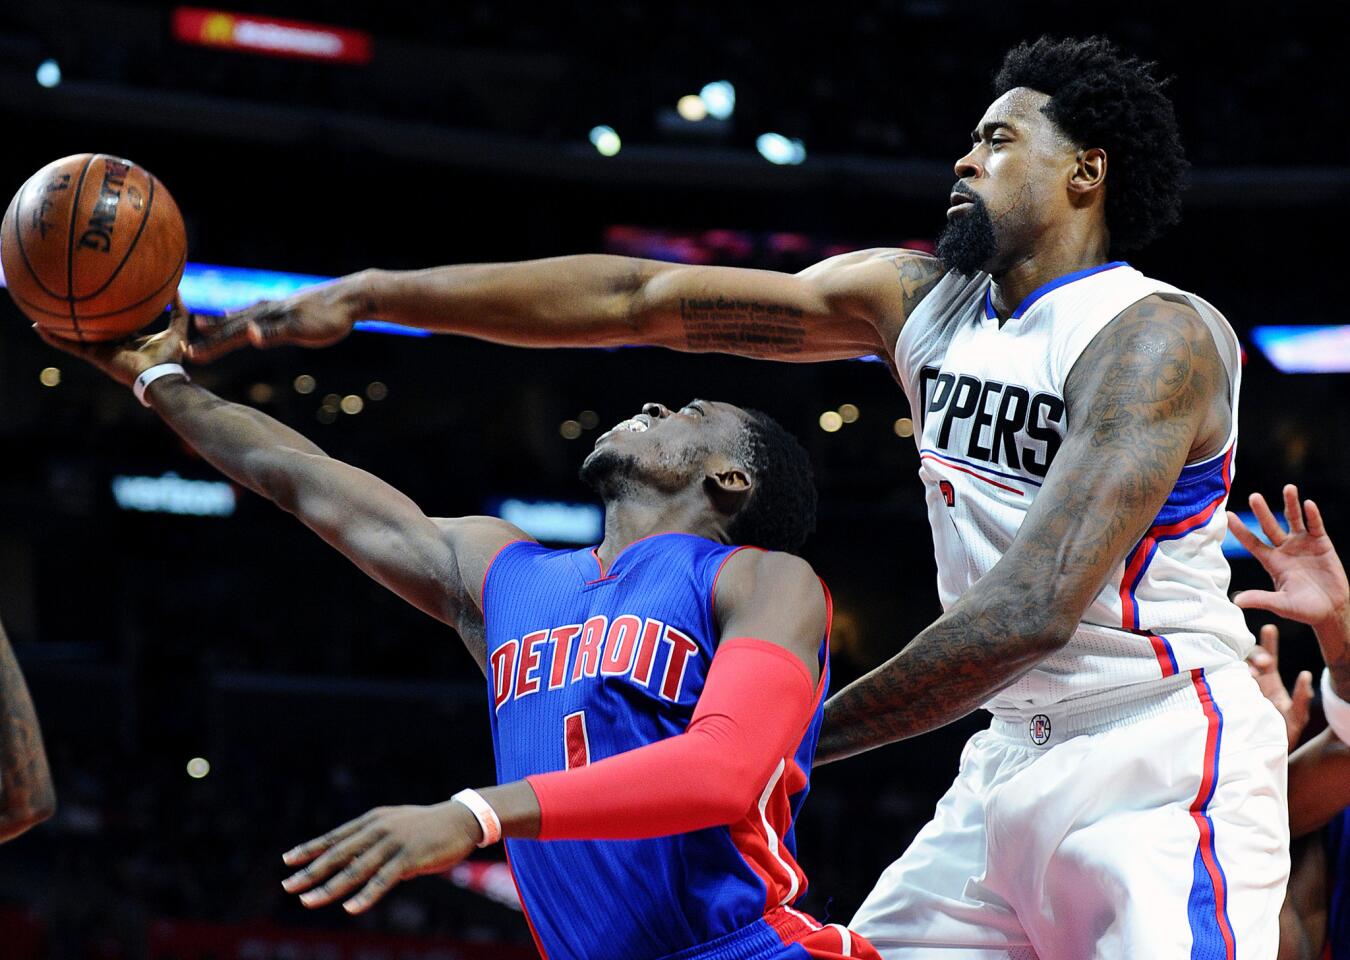 Clippers center DeAndre Jordan forces Pistons guard Reggie Jackson into a missed shot in the fourth quarter.